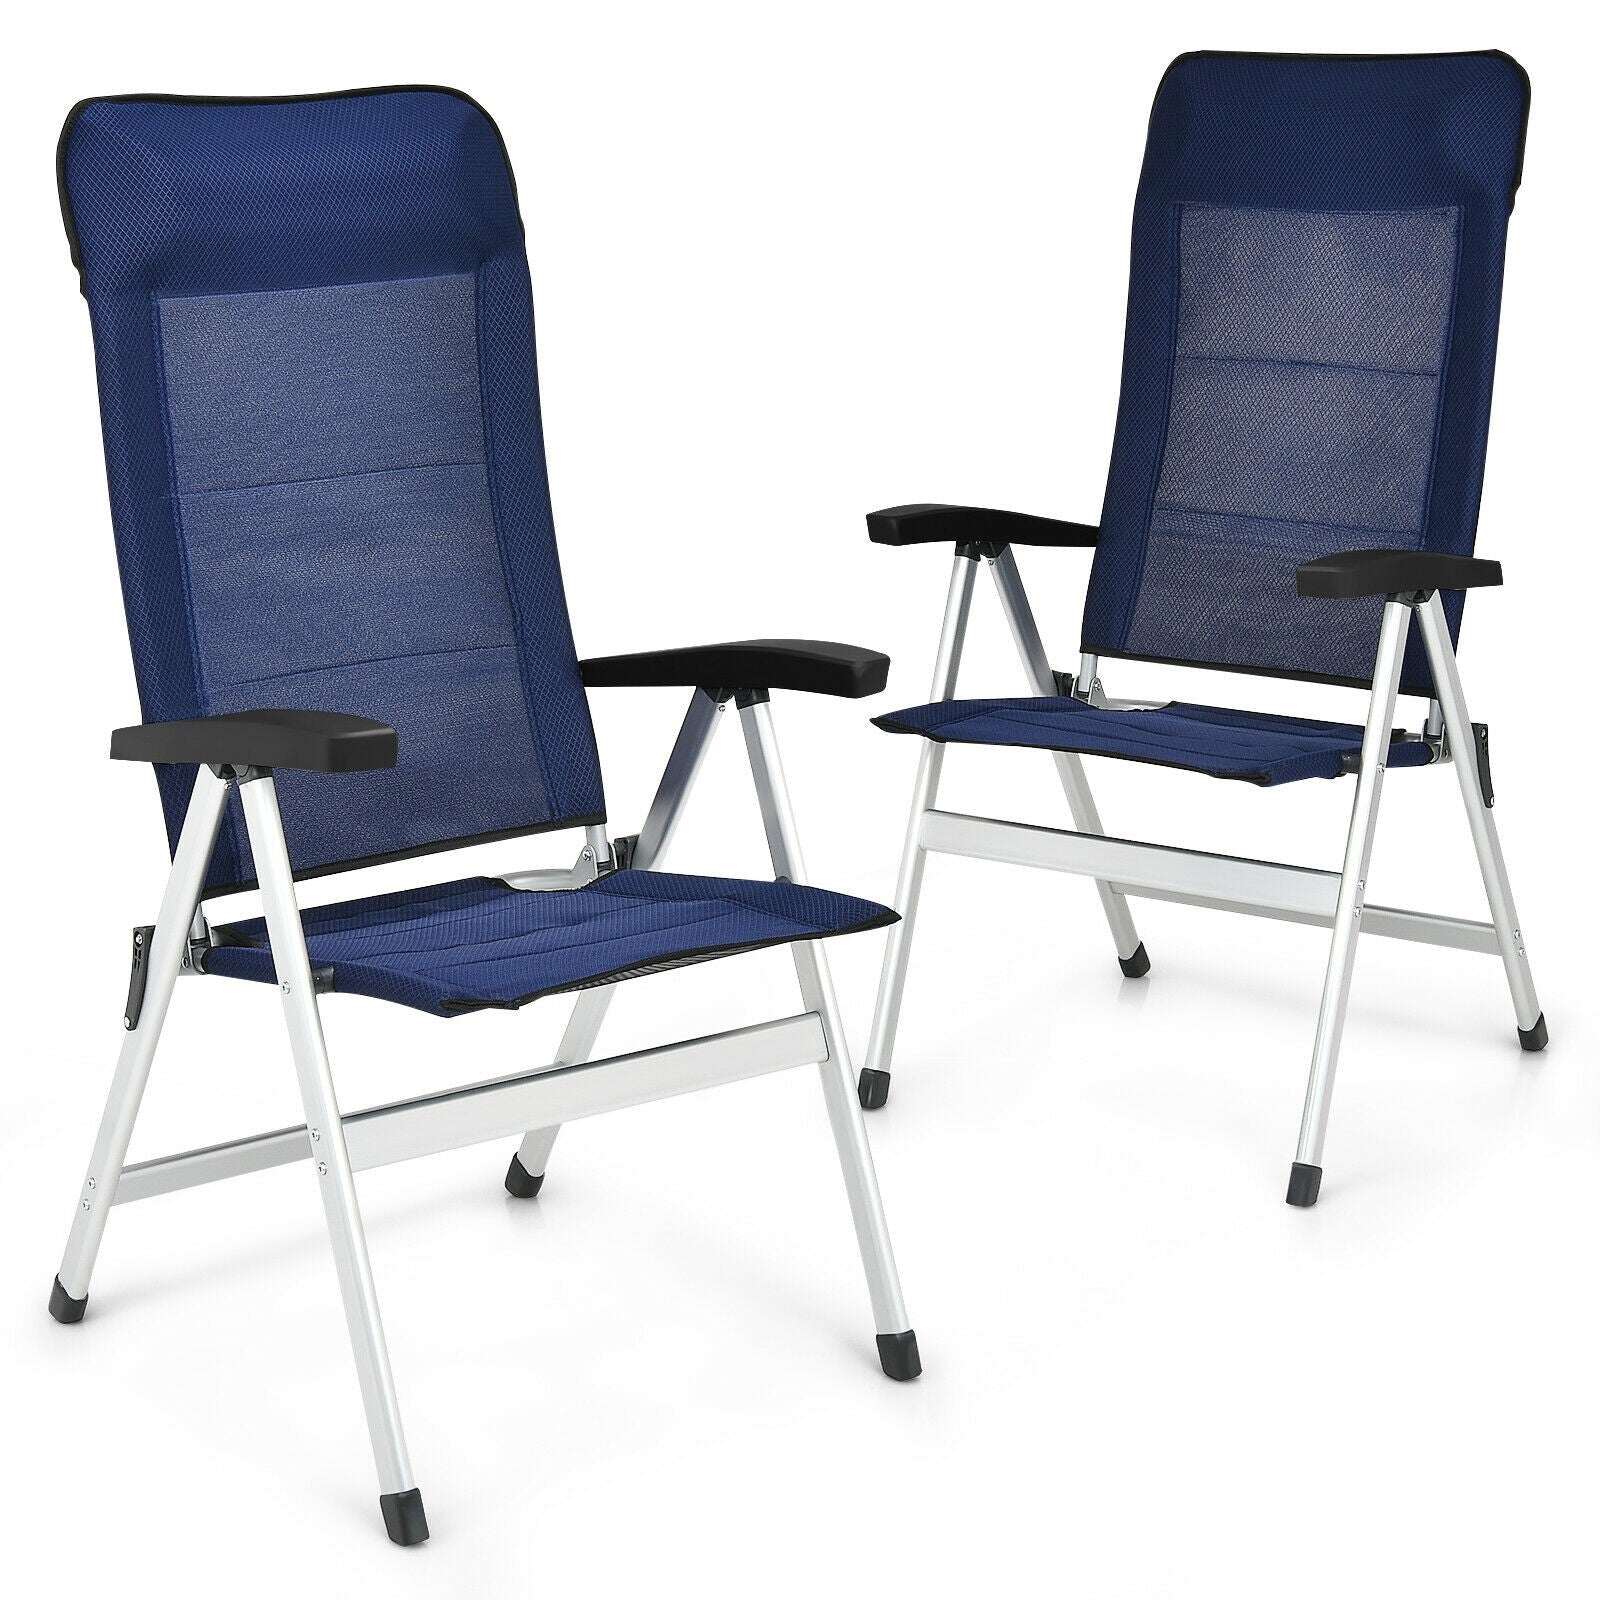 Giantex Set of 4 Patio Chairs, Folding Outdoor Chairs, High Back Recliner (Blue)